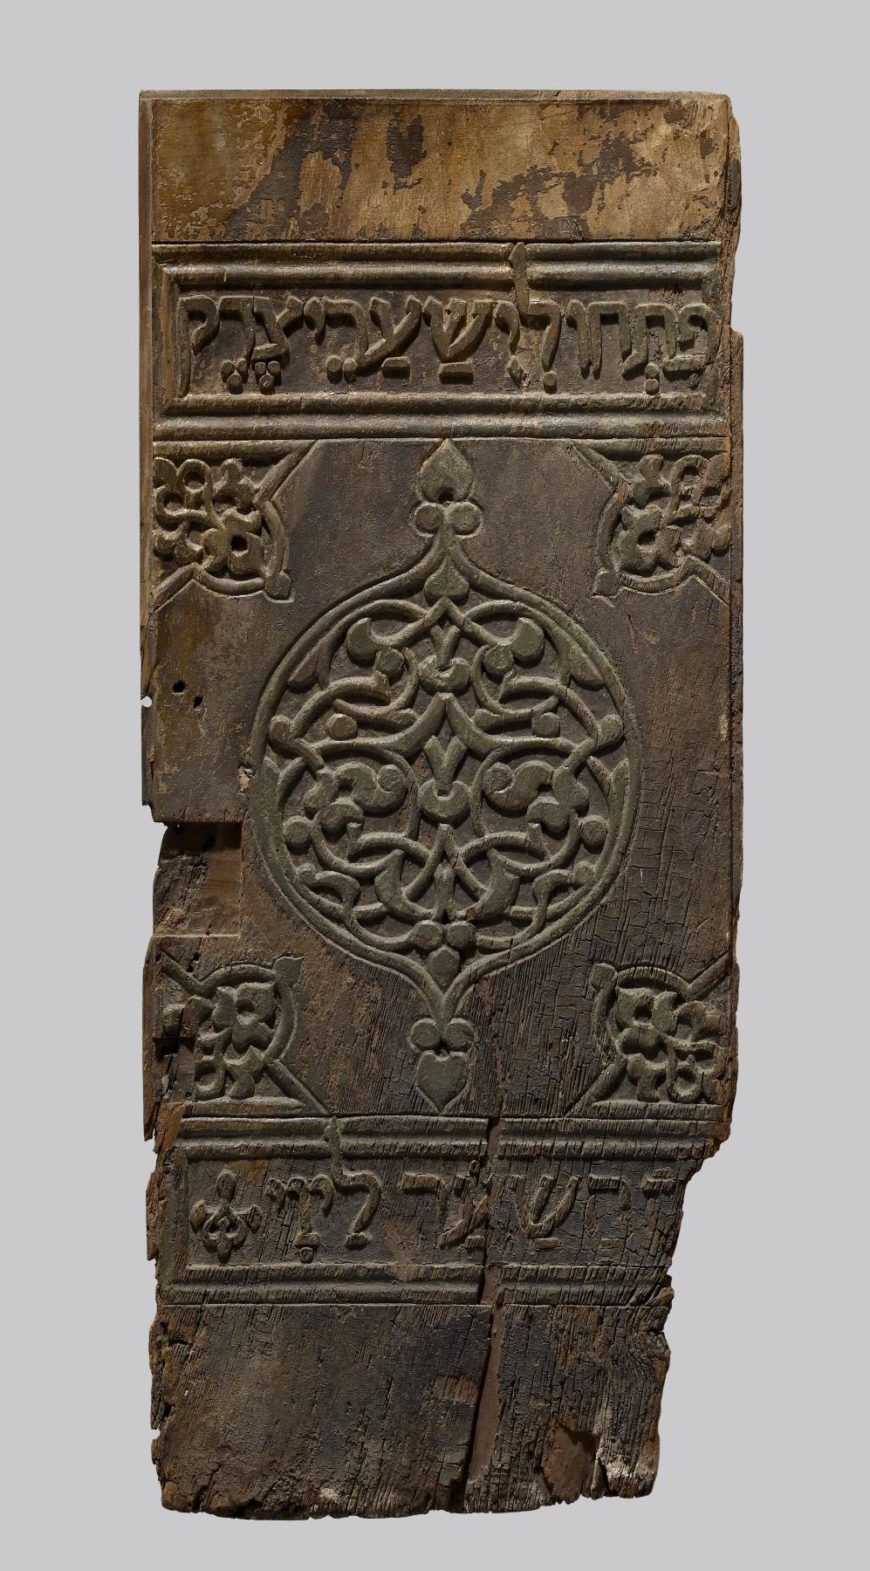 Panel from a Torah Shrine from the Ben Ezra Synagogue in Cairo, 11th century, wood (walnut) with traces of paint and gilt, 87.3 x 36.7 cm (The Walters Art Museum). The patterns of vine scrolls and lozenges shows the influence of Islamic art.